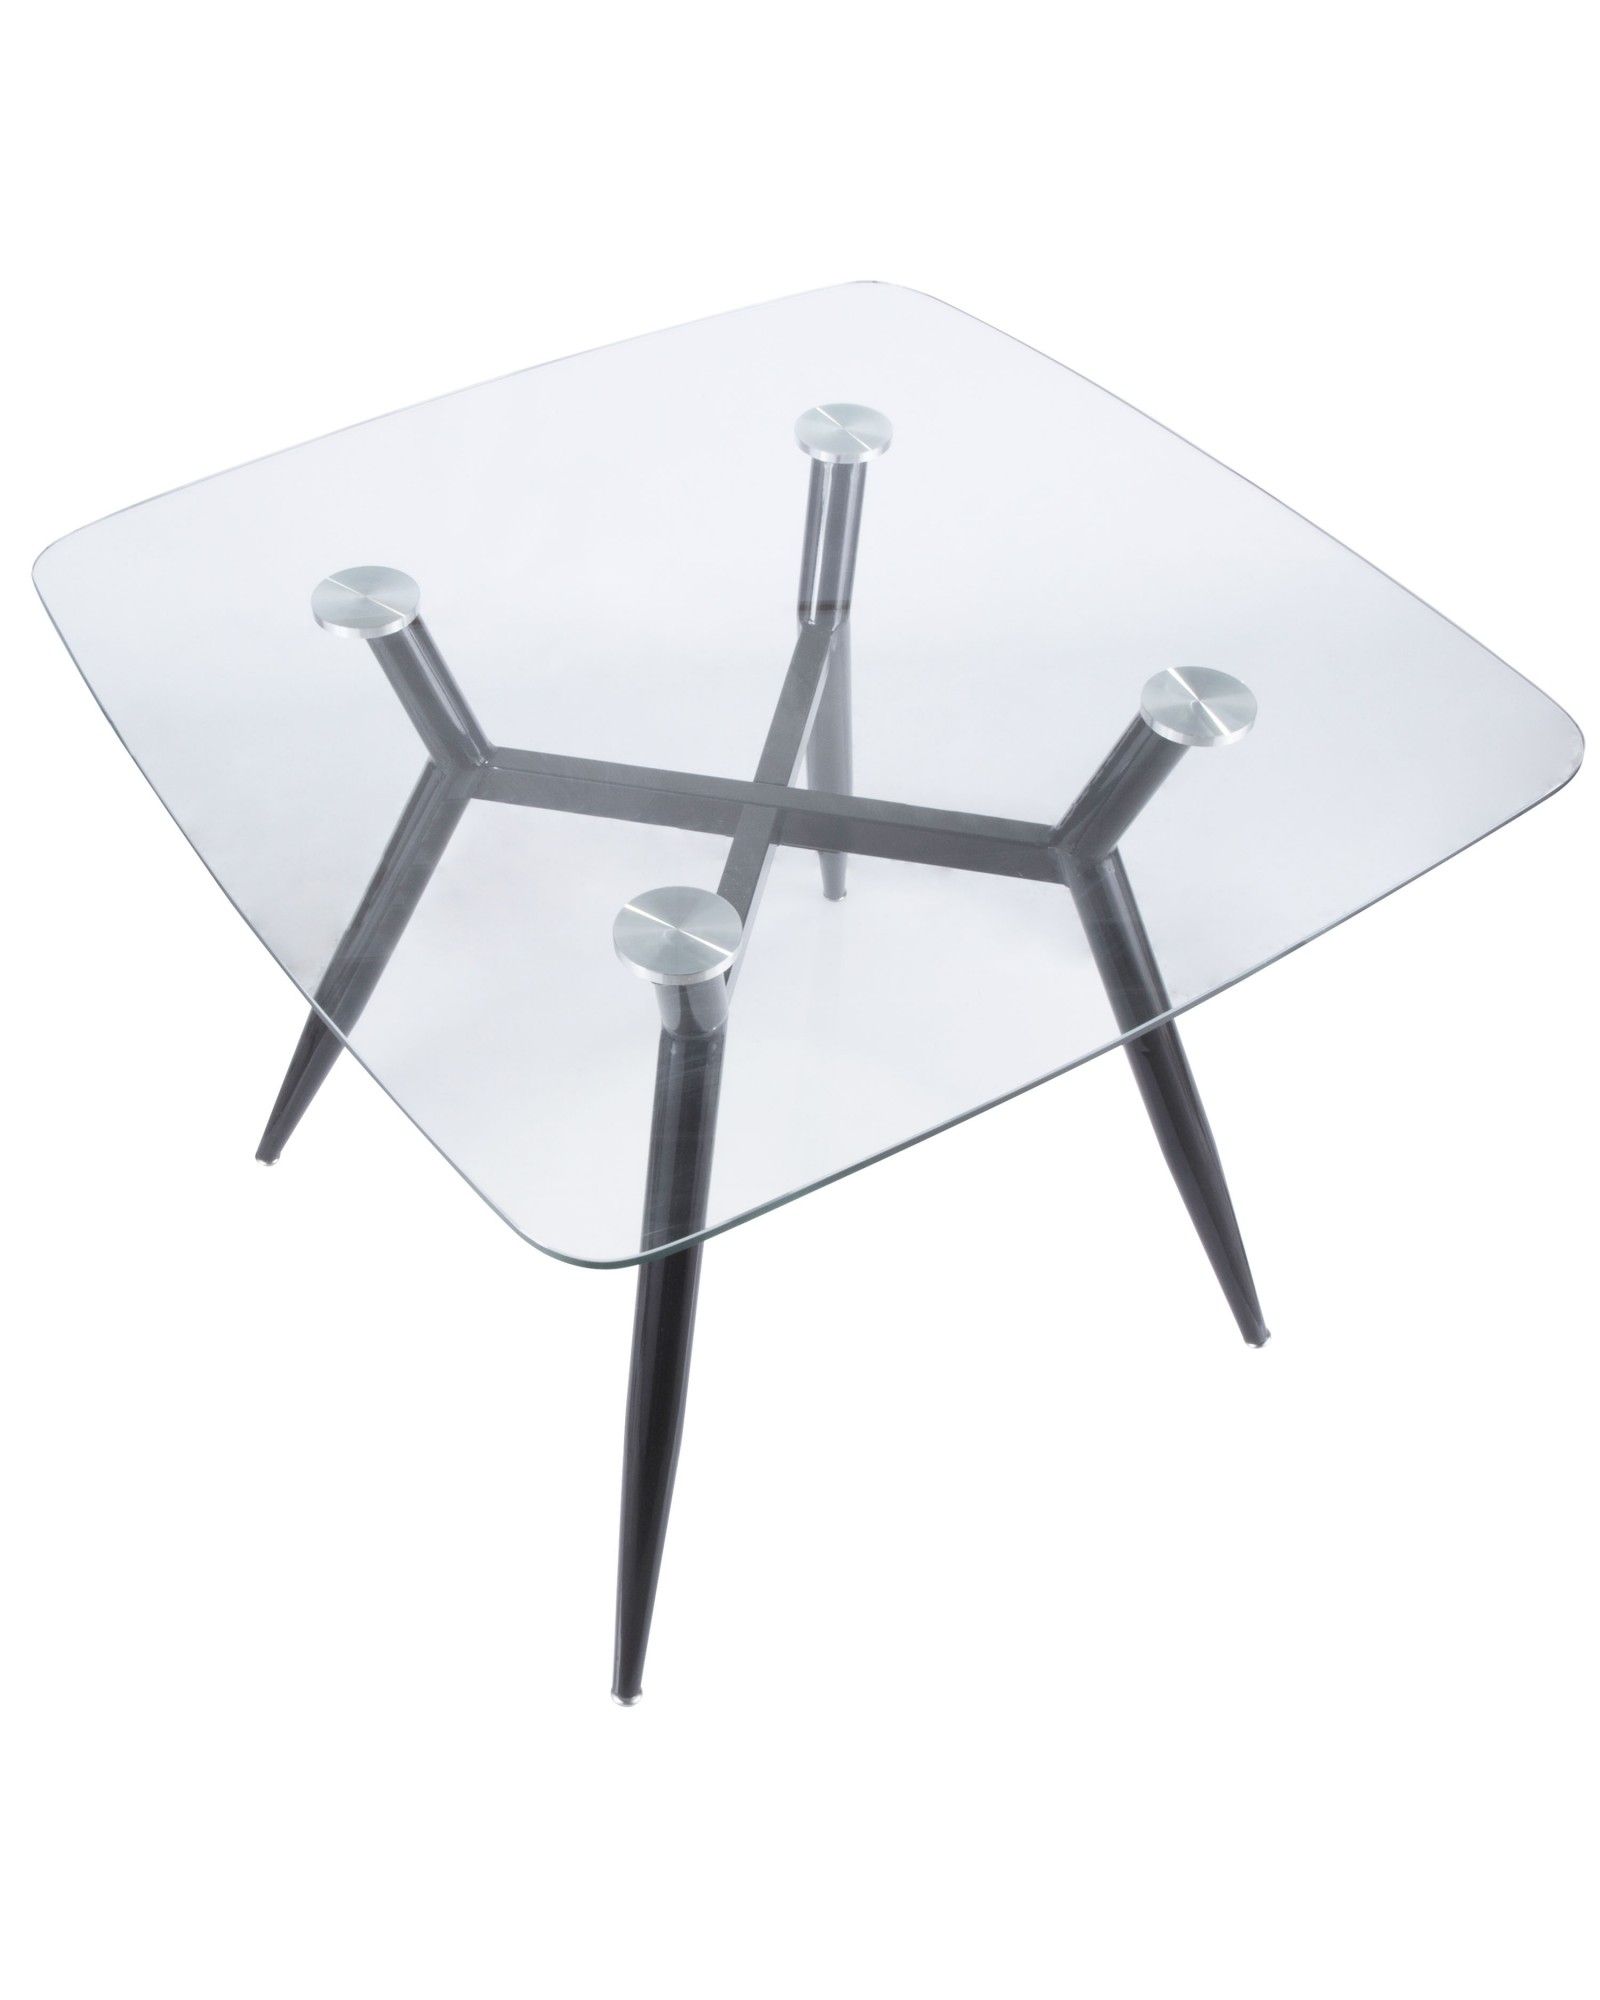 Clara Mid-Century Modern Square Dining Table with Black Metal Legs and Clear Glass Top